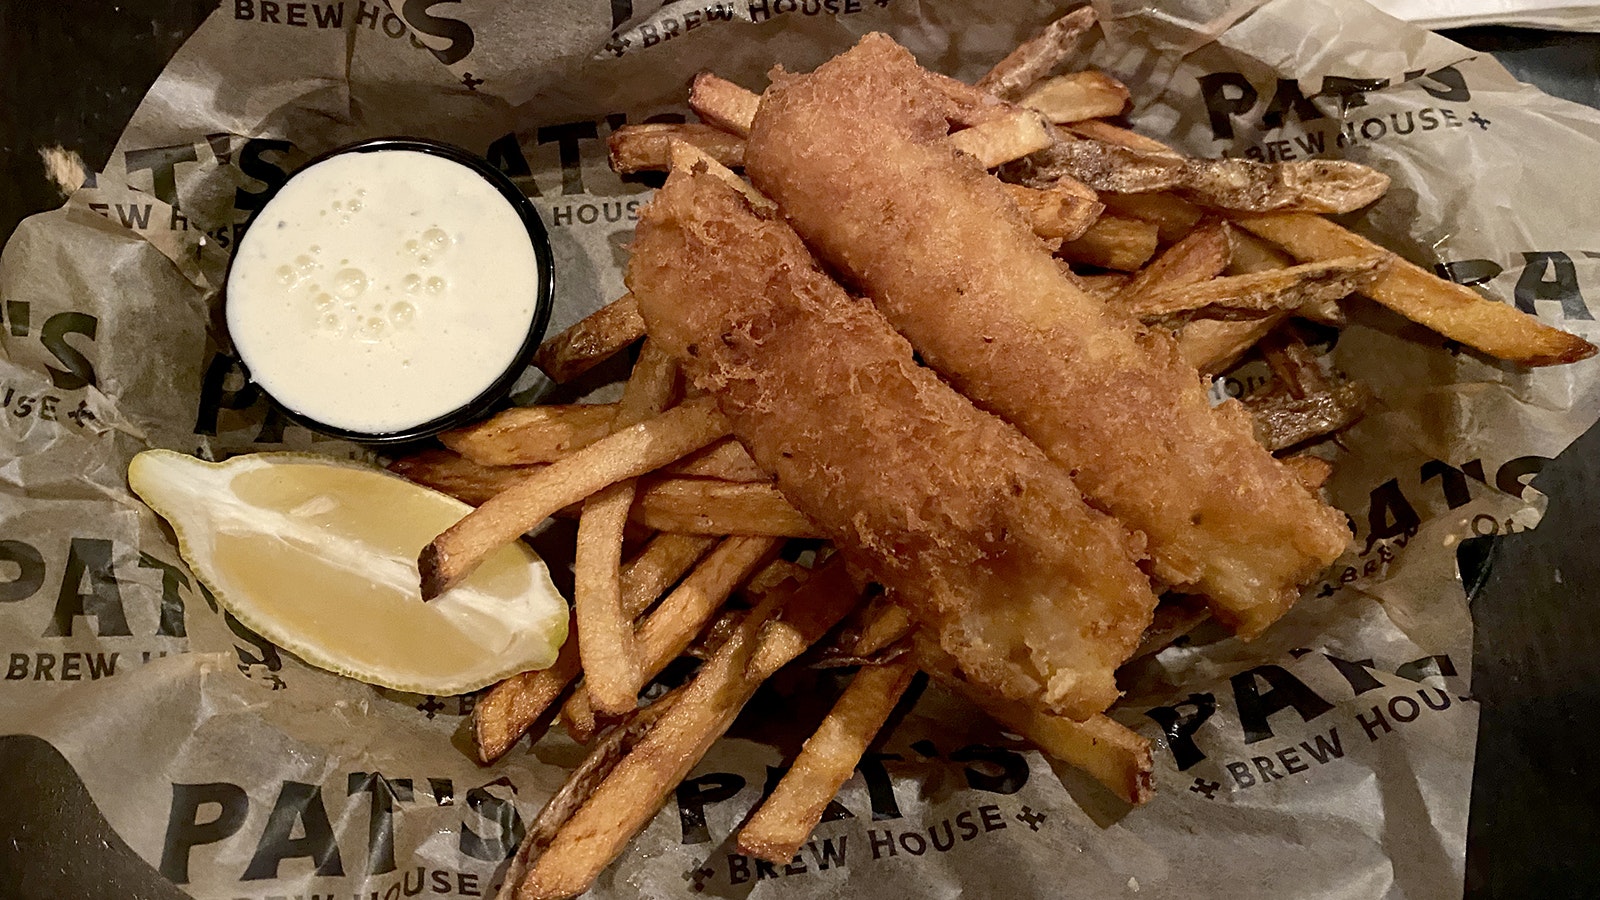 The fish and chips comes in portions of two to four pieces of cod and is served with house-cut fries.